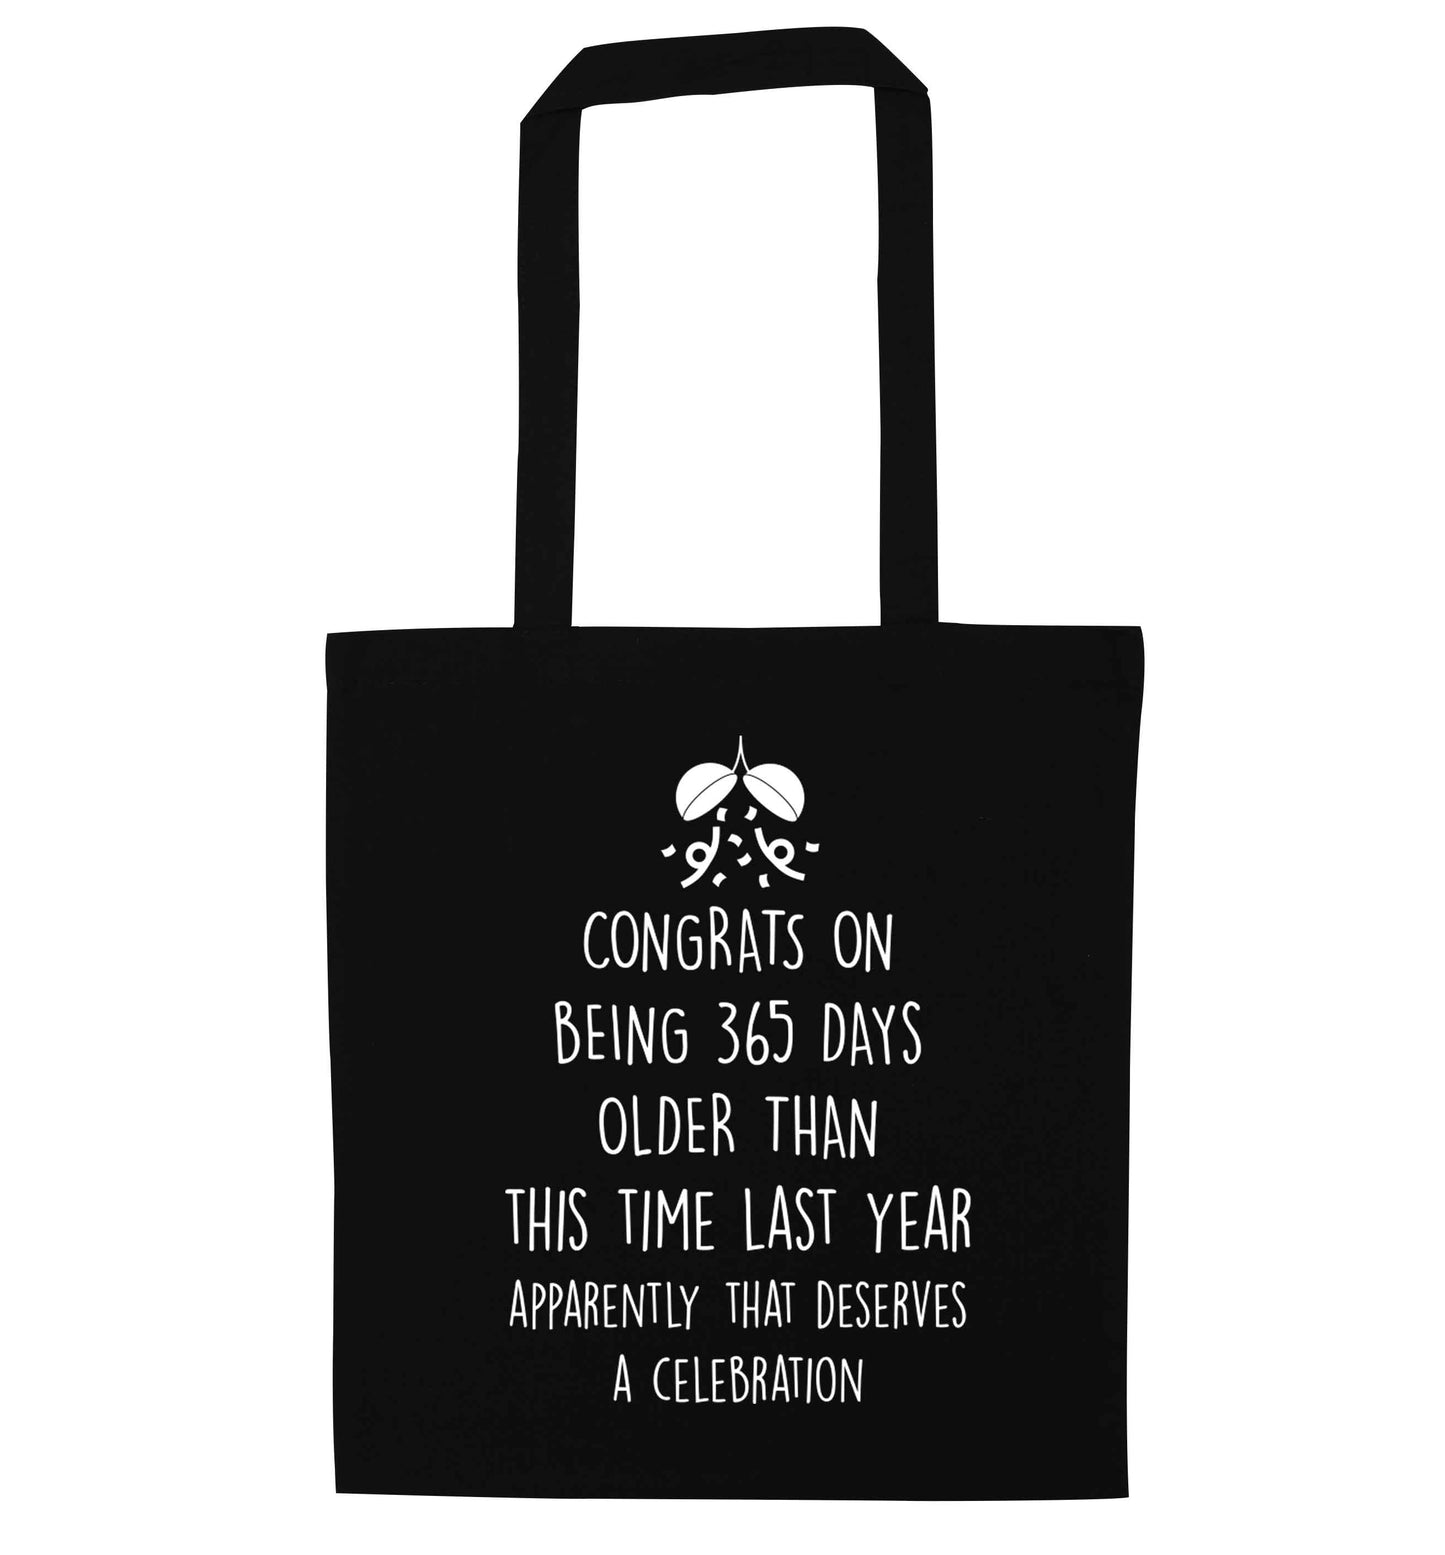 Congrats on being 365 days older than you were this time last year apparently that deserves a celebration black tote bag